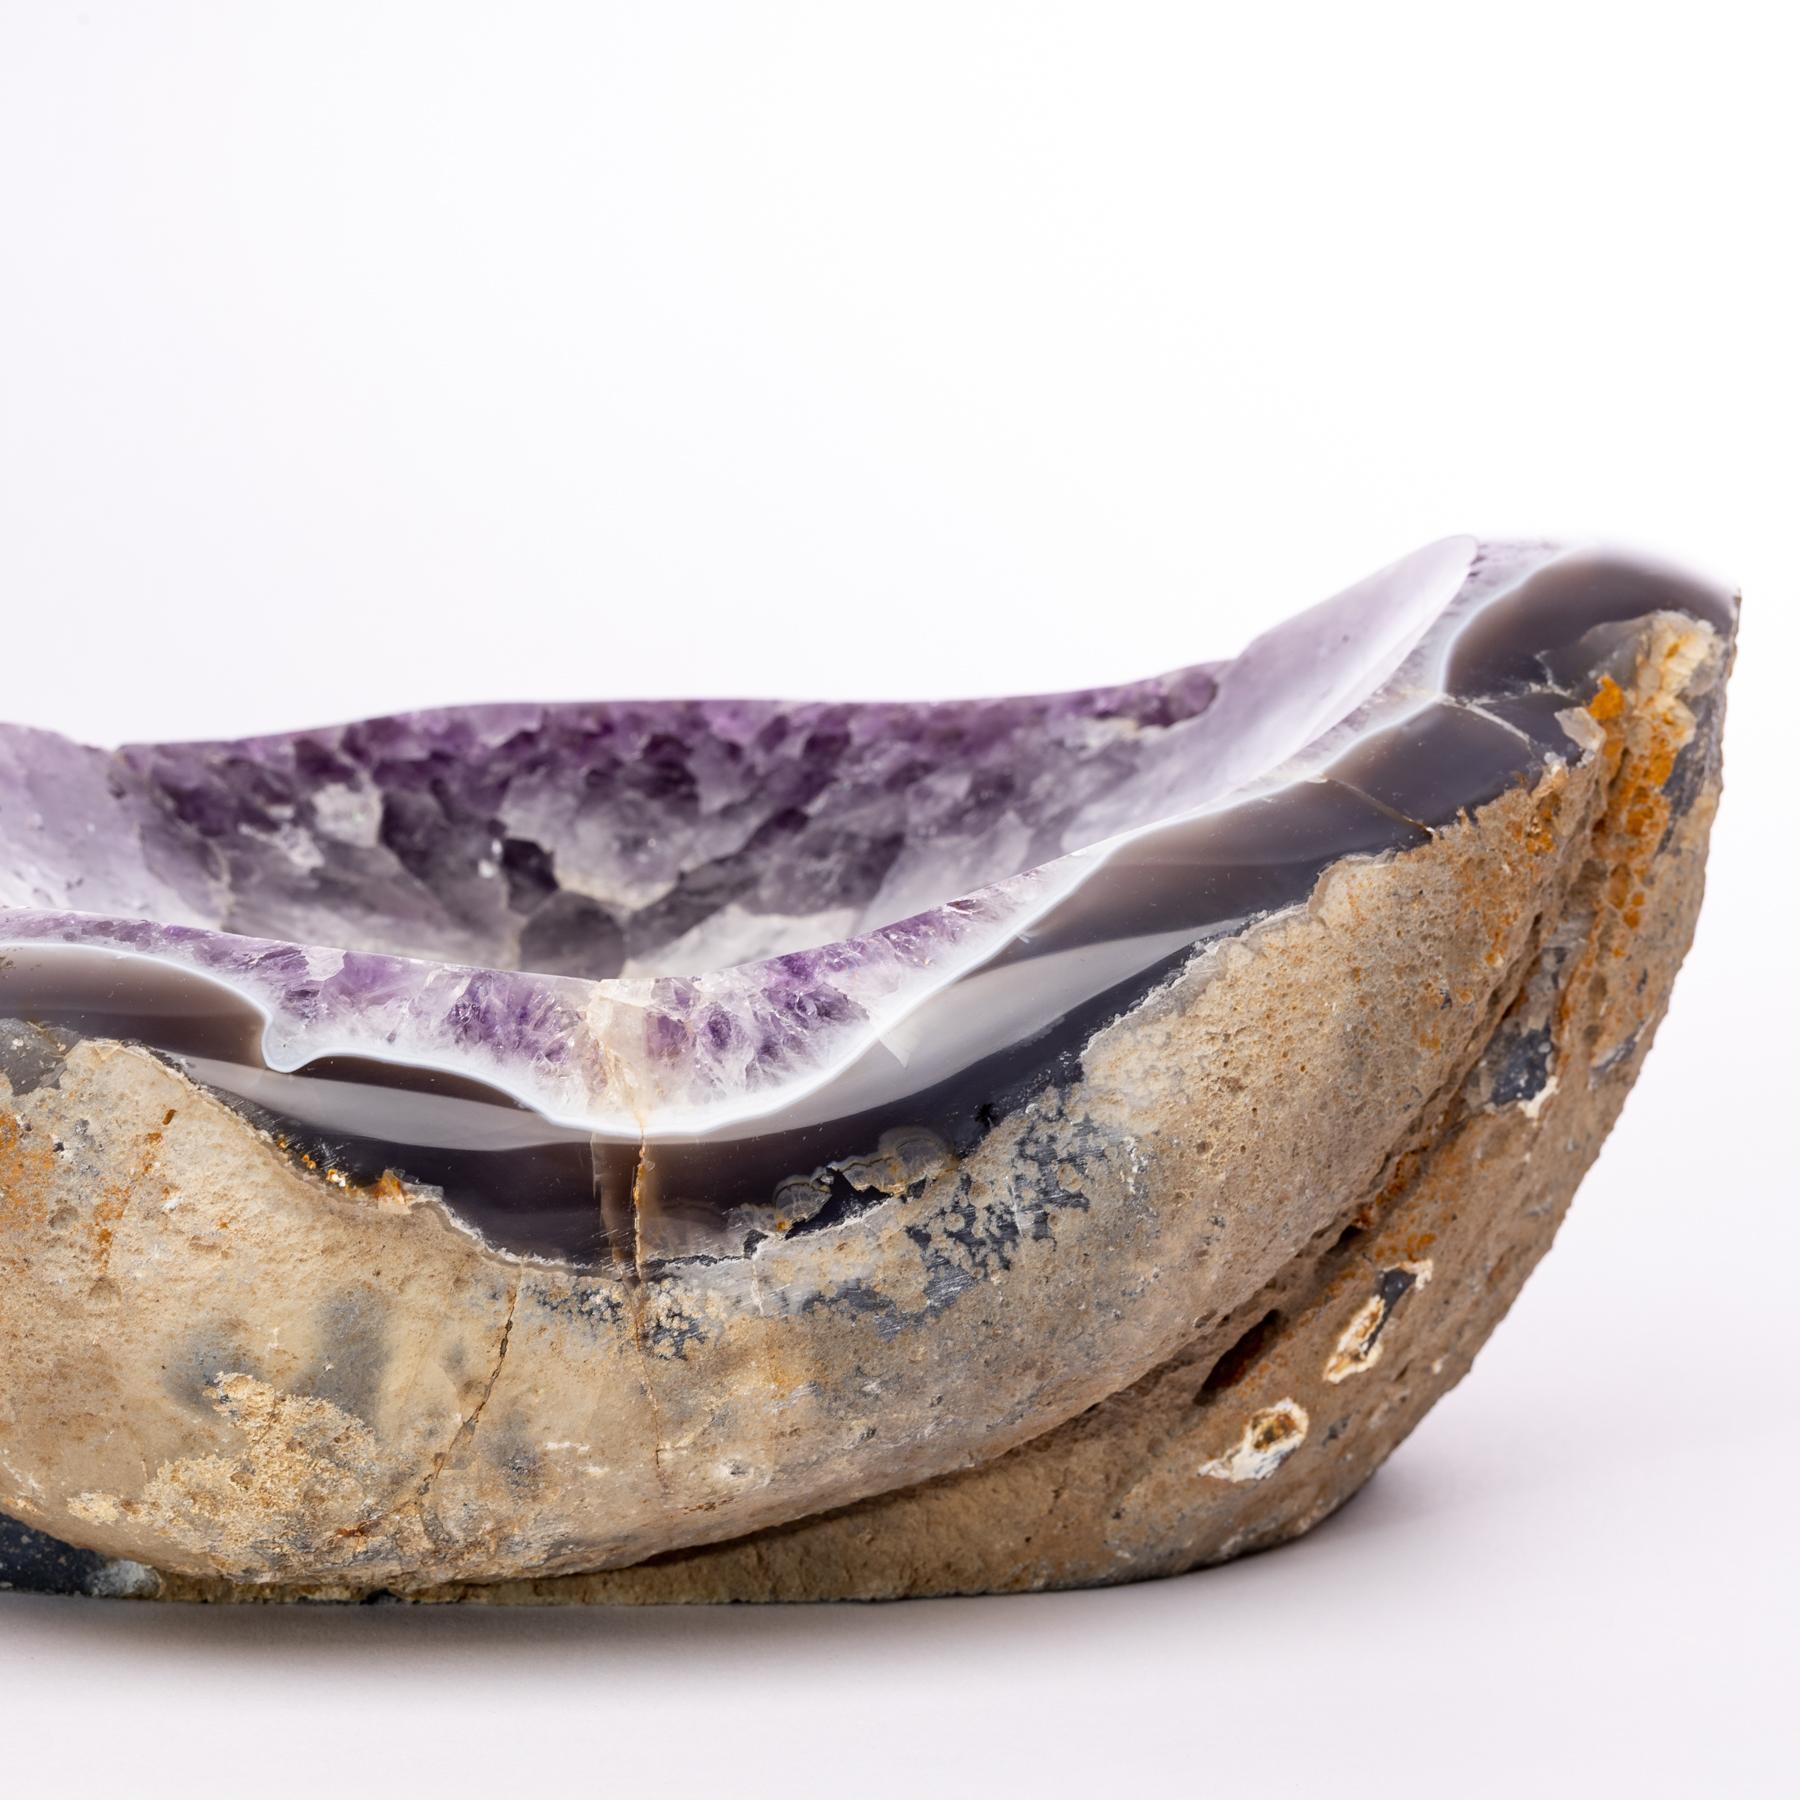 Mexican Deep Purple Amethyst Geode Polished Bowl from Madagascar in Organic Shape